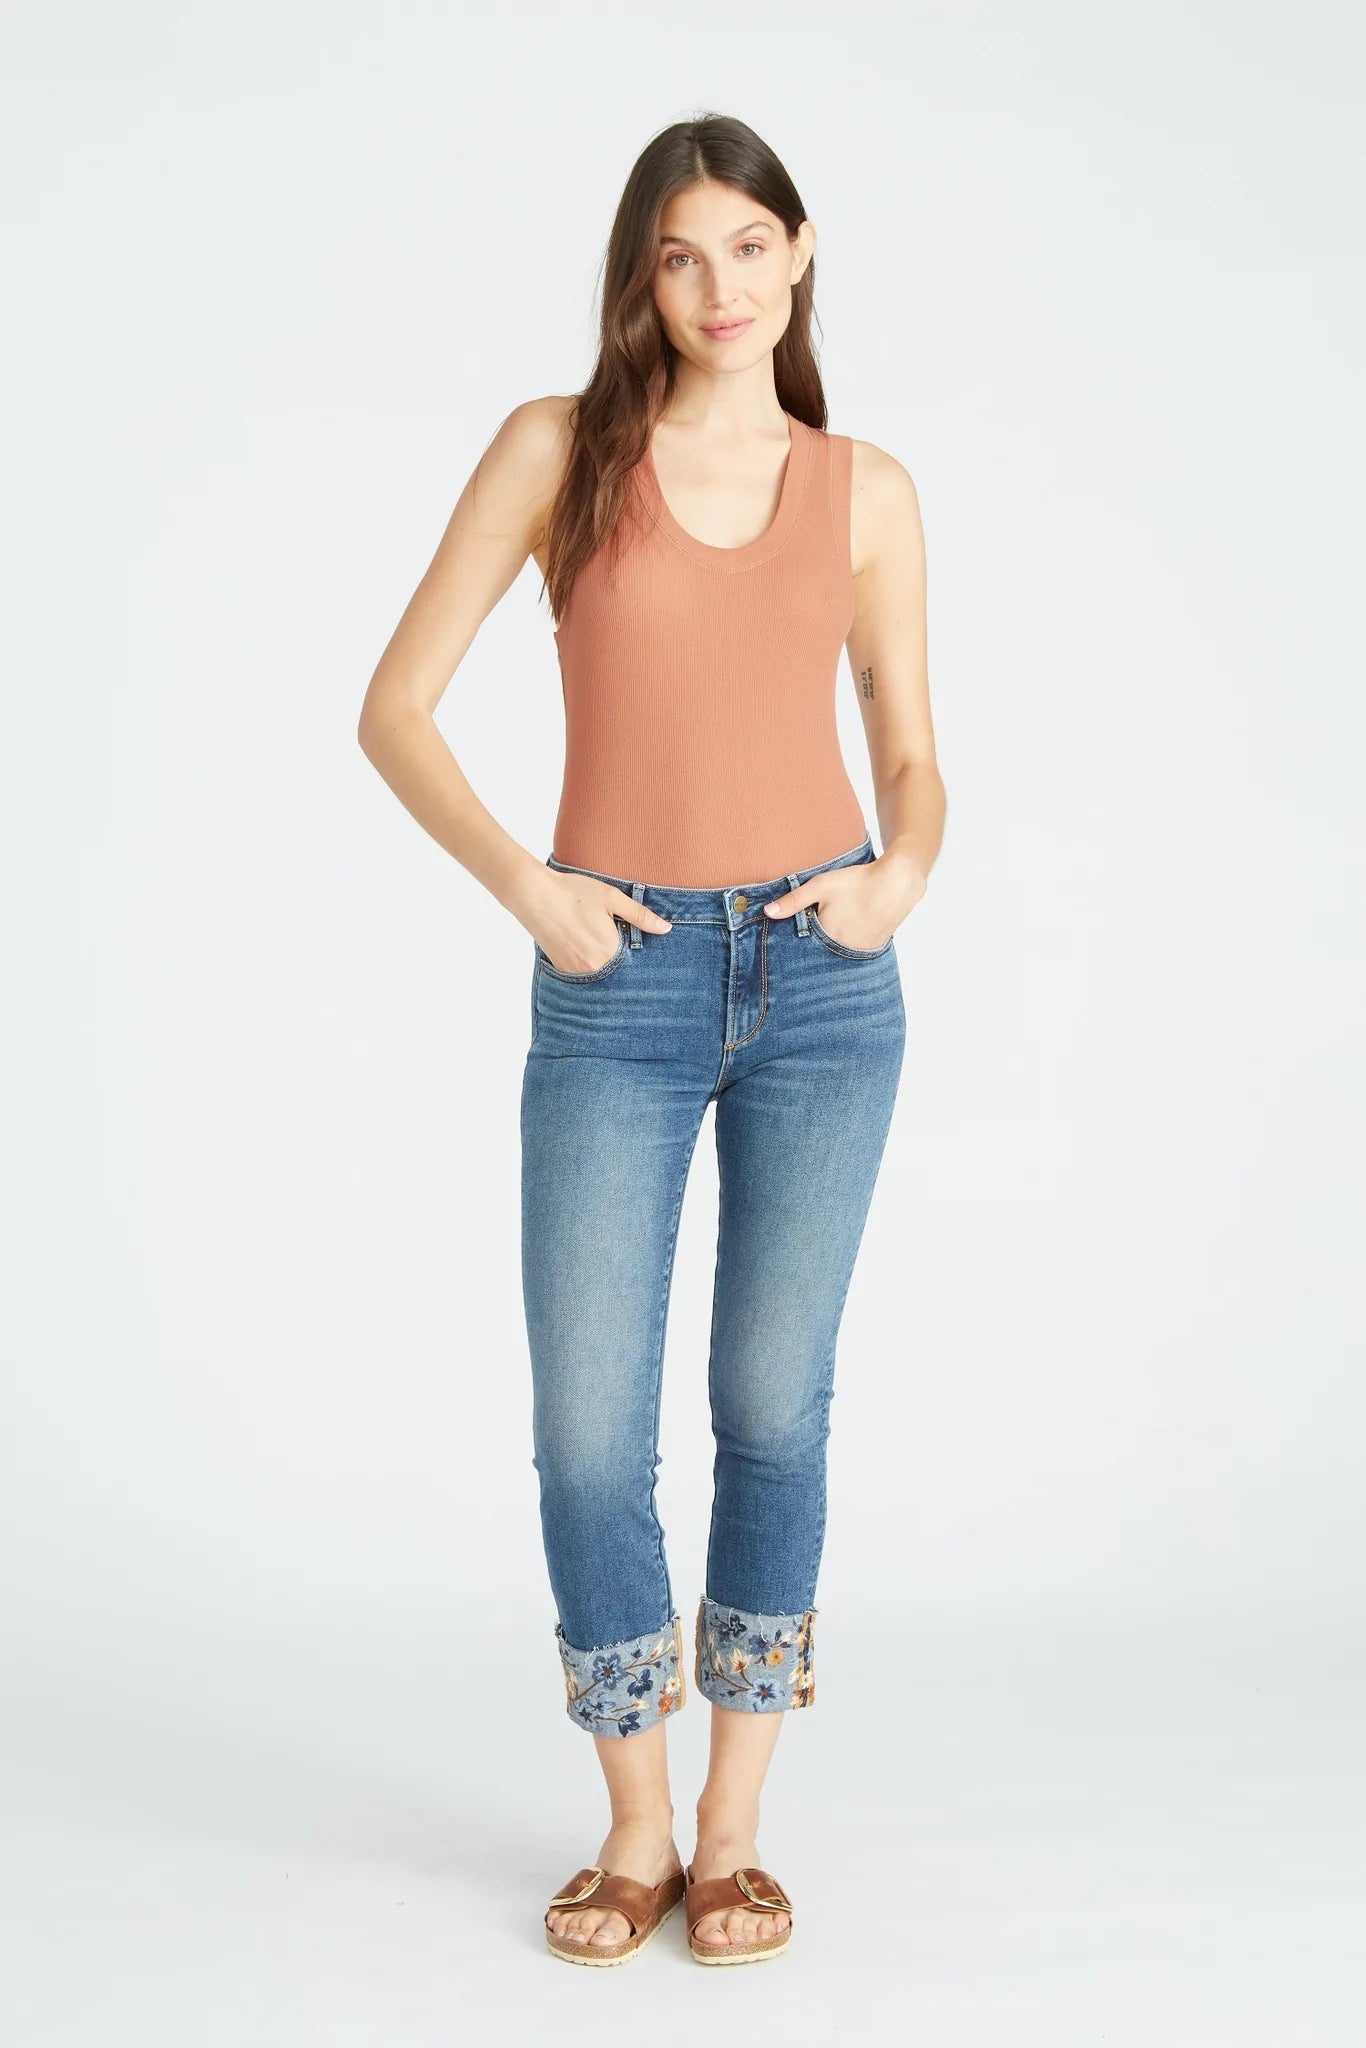 Driftwood Colette in Evening Floral Jeans